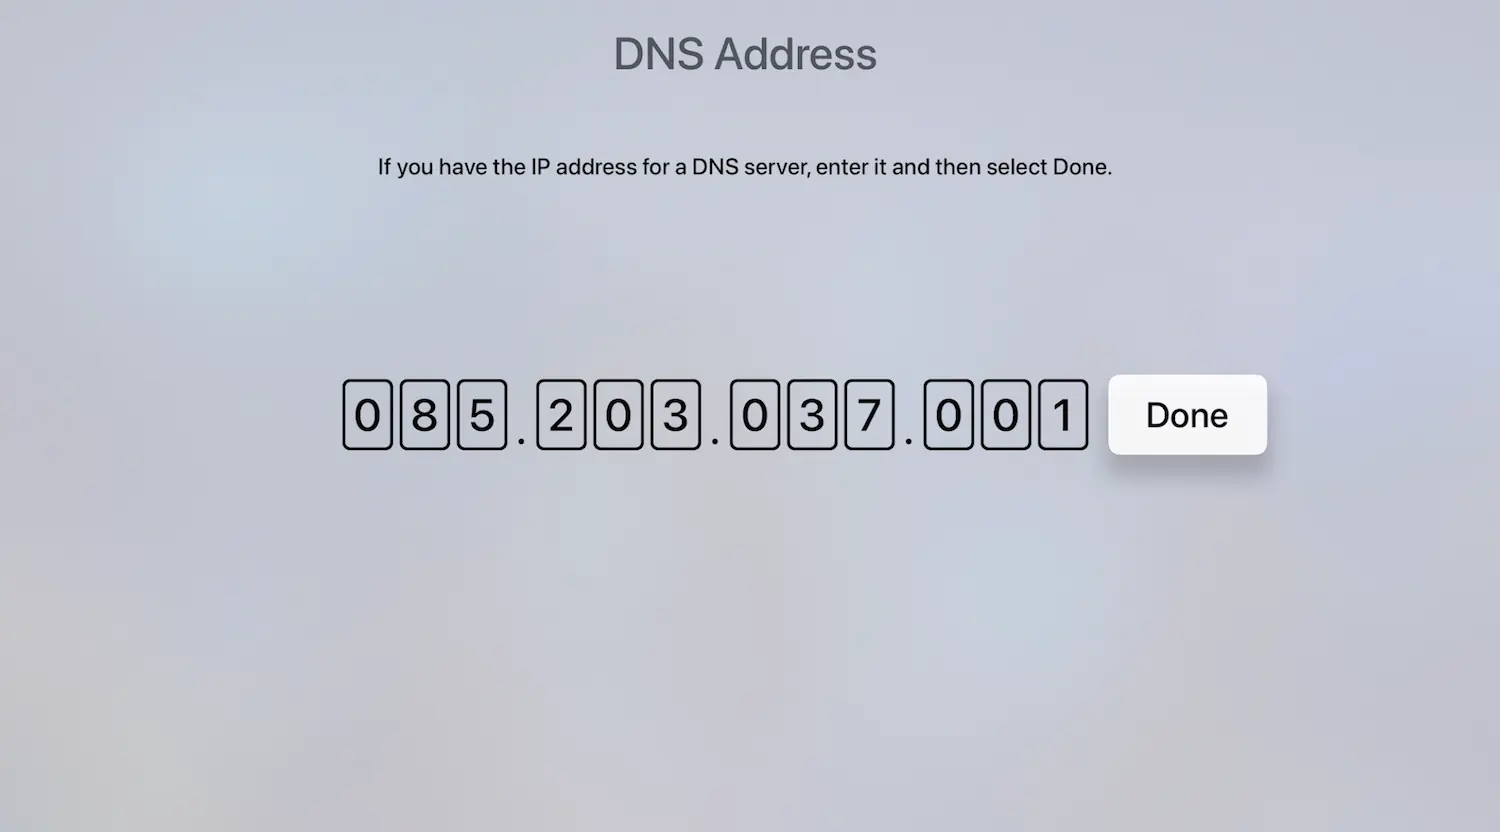 Entering in a manual DNS address on Apple TV